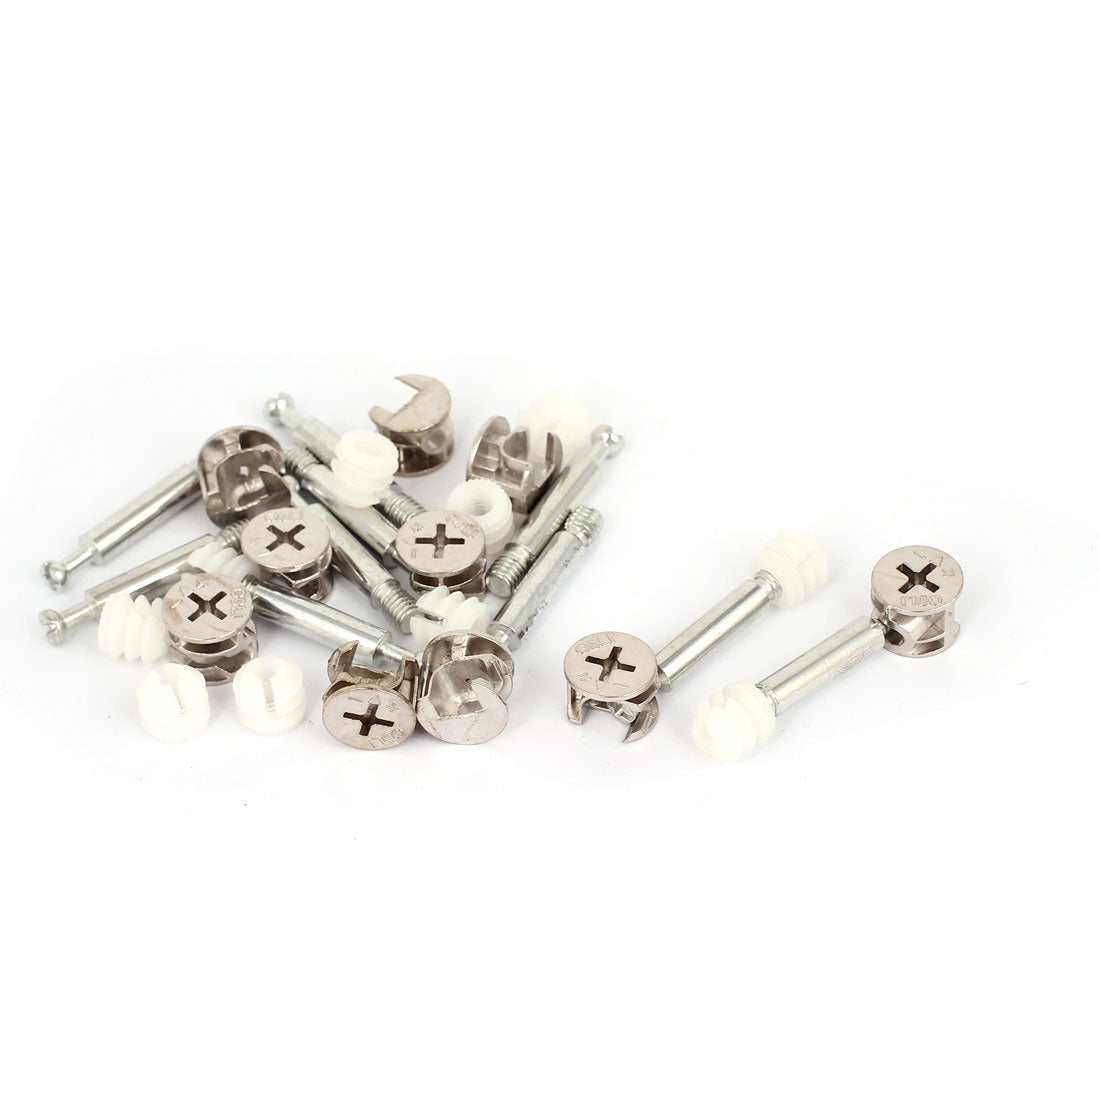 uxcell Uxcell 10 Sets Furniture Connectors Cam Fittings w Dowels w Pre-inserted Nuts